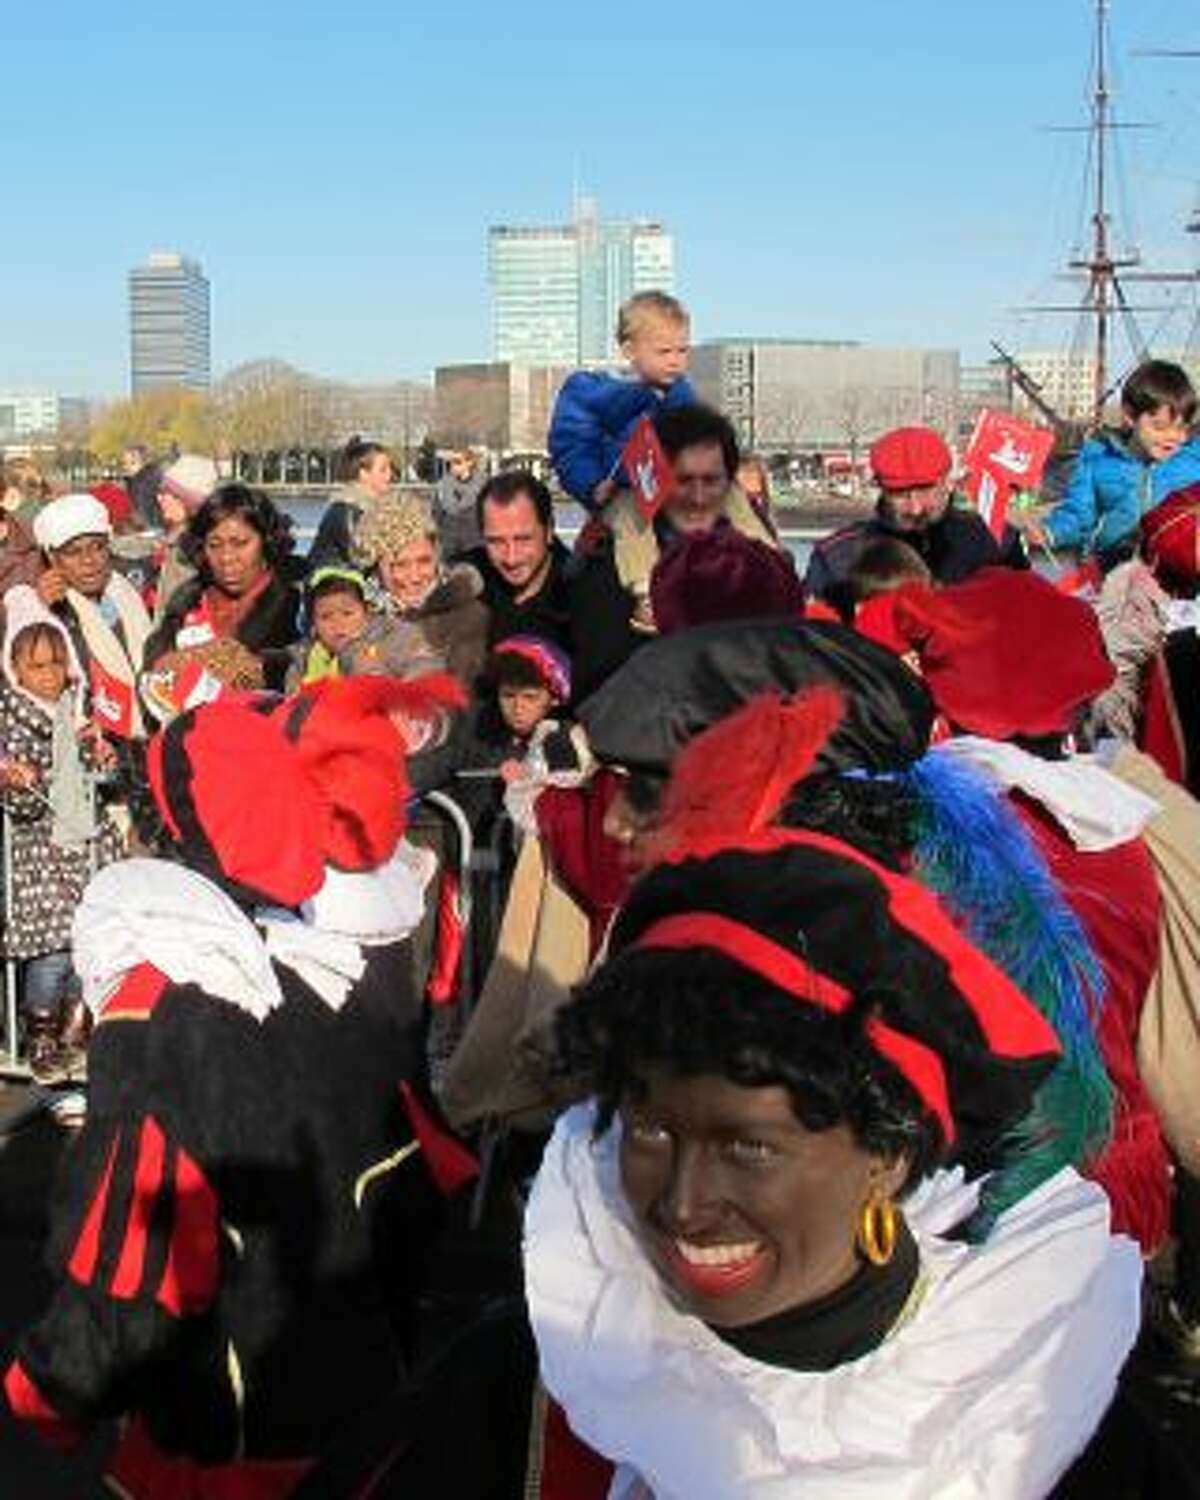 In this Nov. 18, 2012 file photo persons dressed as "Zwarte Piet" or "Black Pete" attend a parade after St. Nicholas, or Sinterklaas, arrived by boat in Amsterdam, Netherlands.